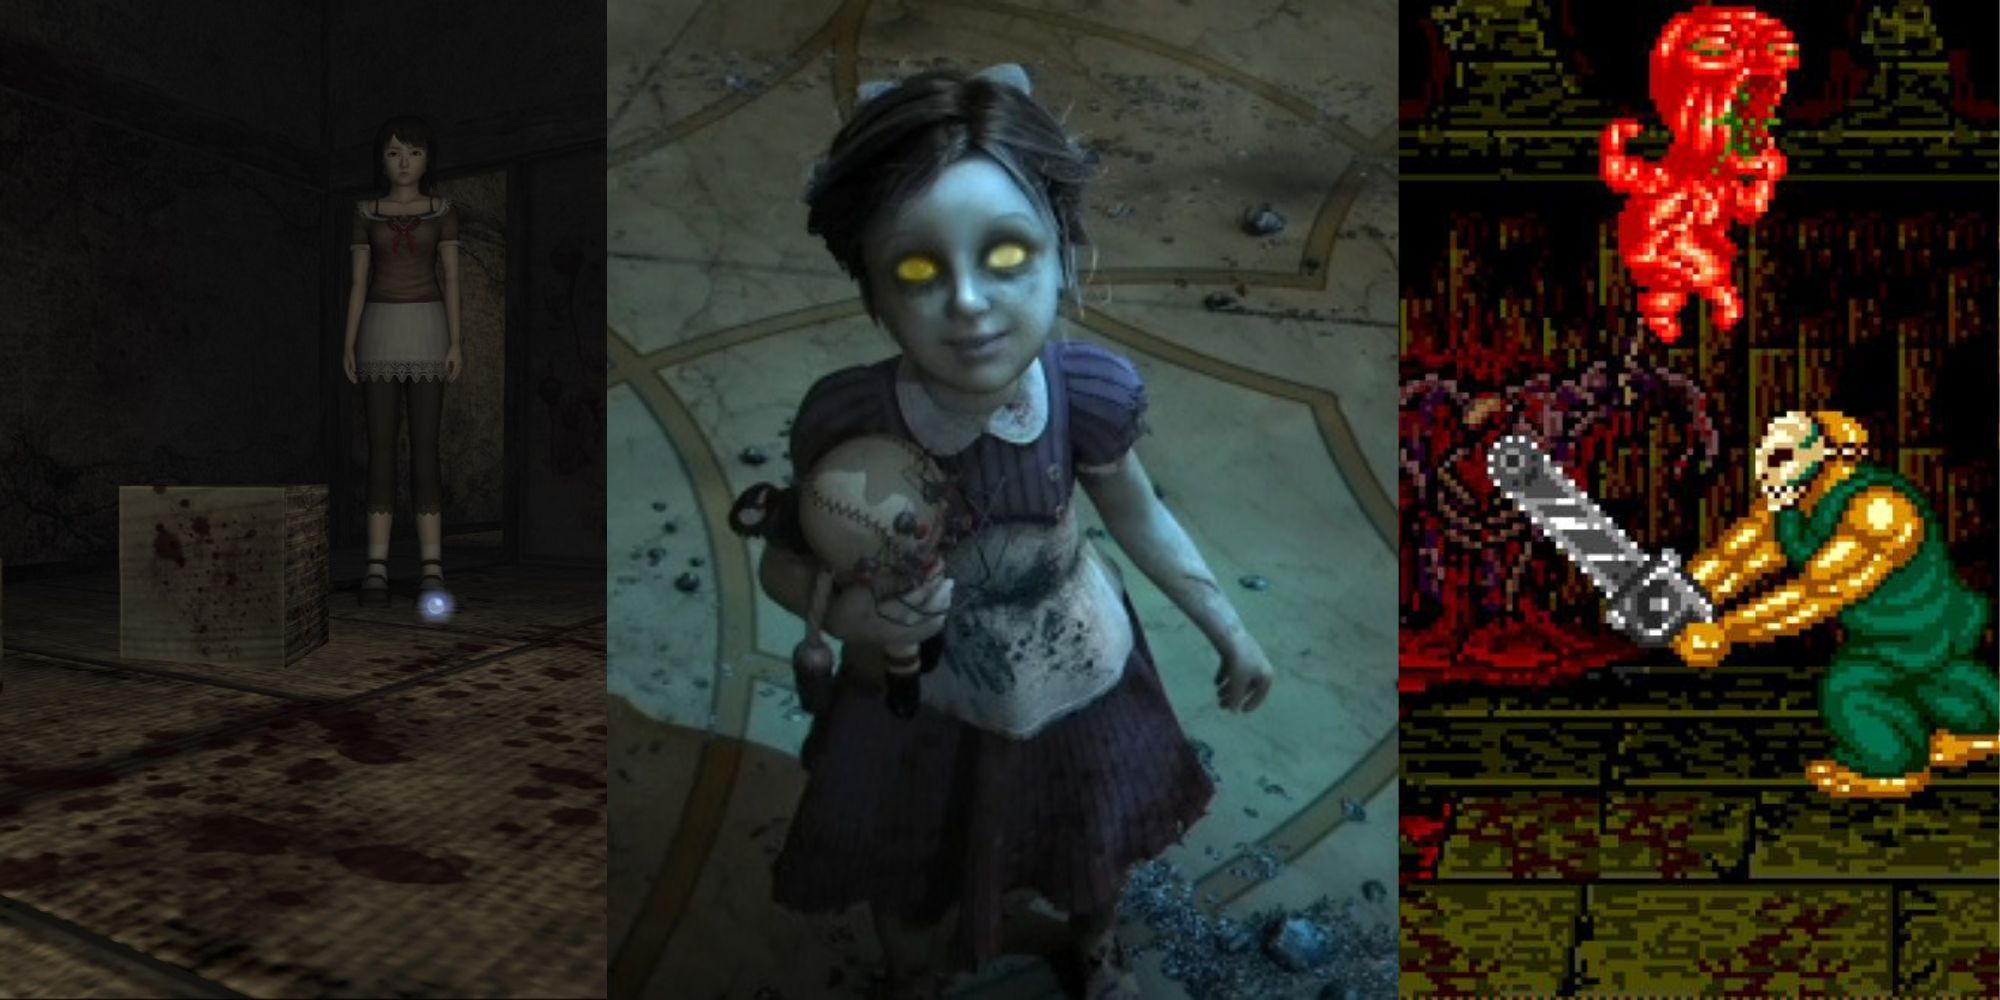 Three horror images from Bioshock, Splatterhouse 2 and Fatal Frame 2